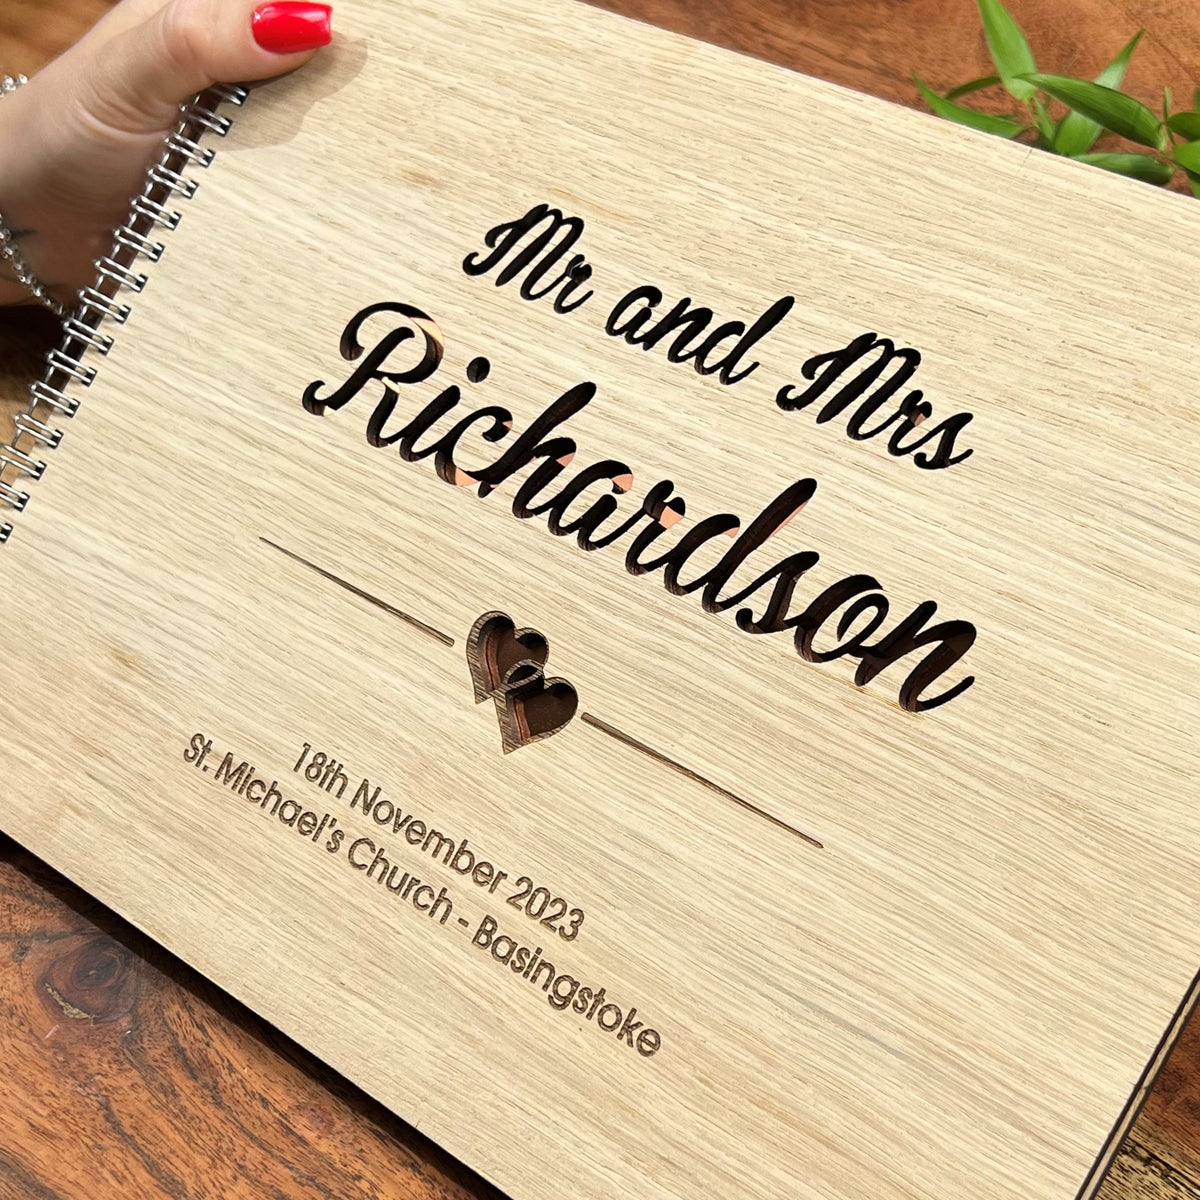 Cut out Wedding Guestbook